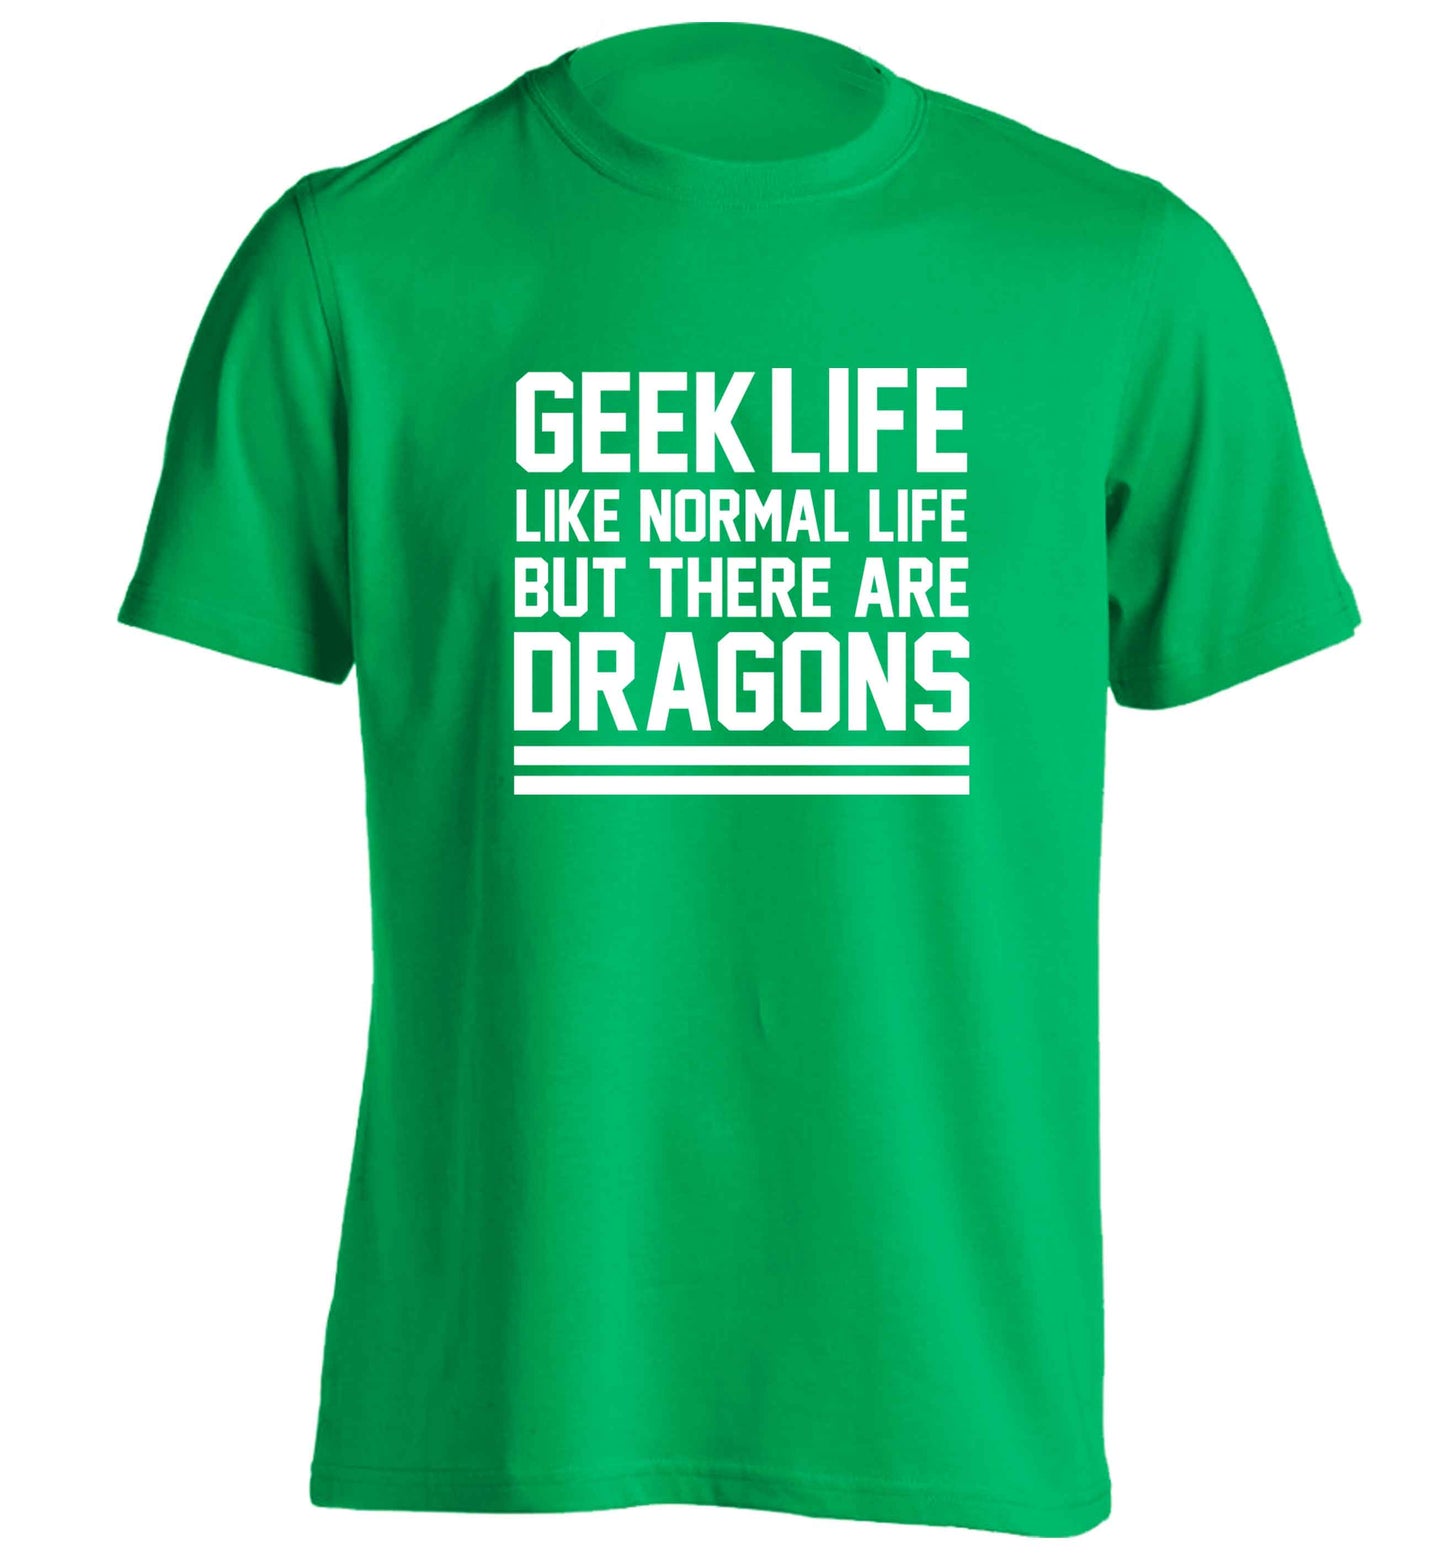 Geek life like normal life but there are dragons adults unisex green Tshirt 2XL